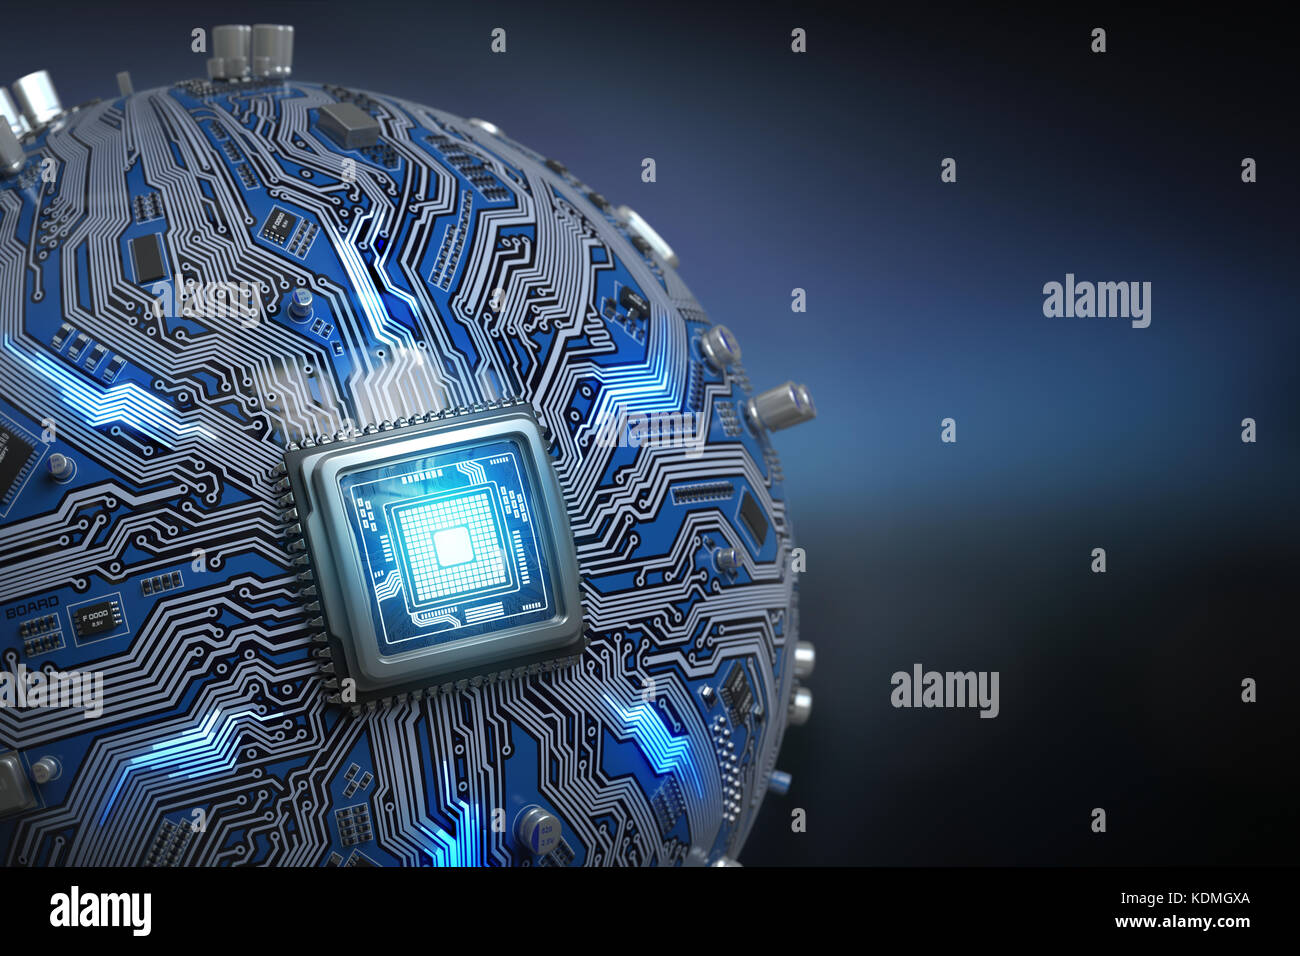 Circuit board system chip with core processor. Spherical computer motherboard with CPU. Futuristic computer technology background. 3d illustration Stock Photo